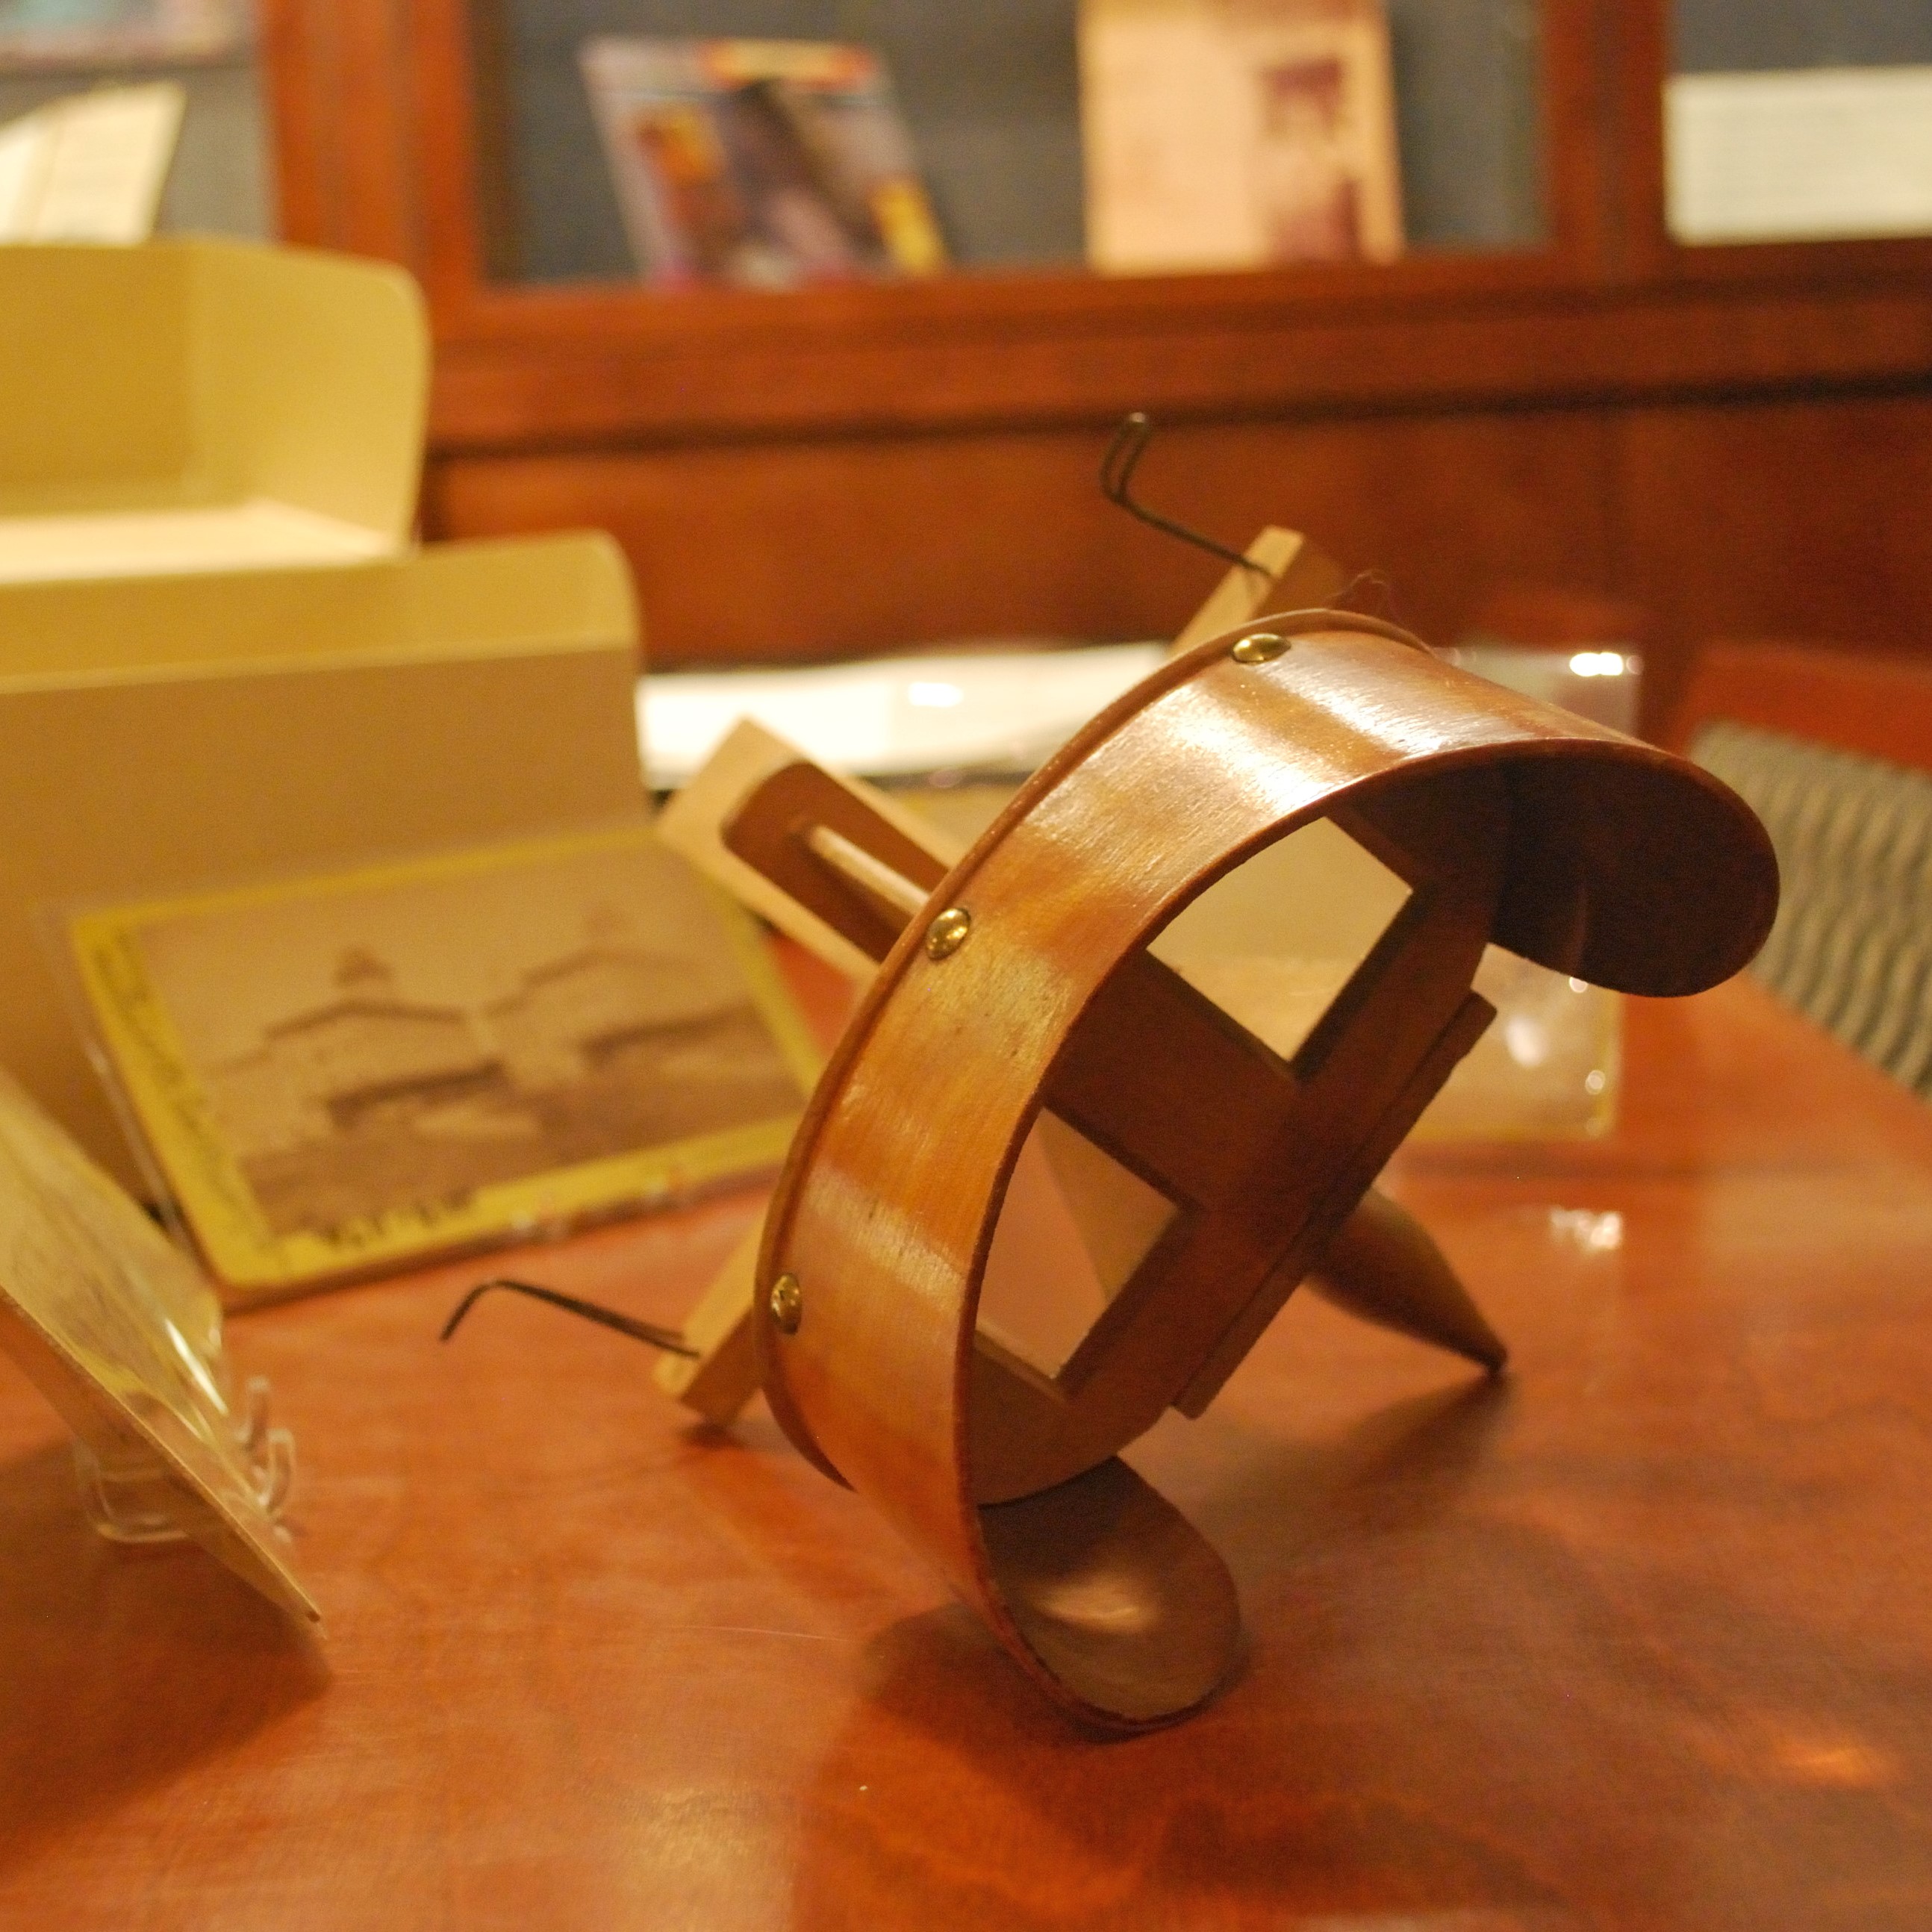 A stereoscope sits on a table with blurred photographs and file folder behind it.